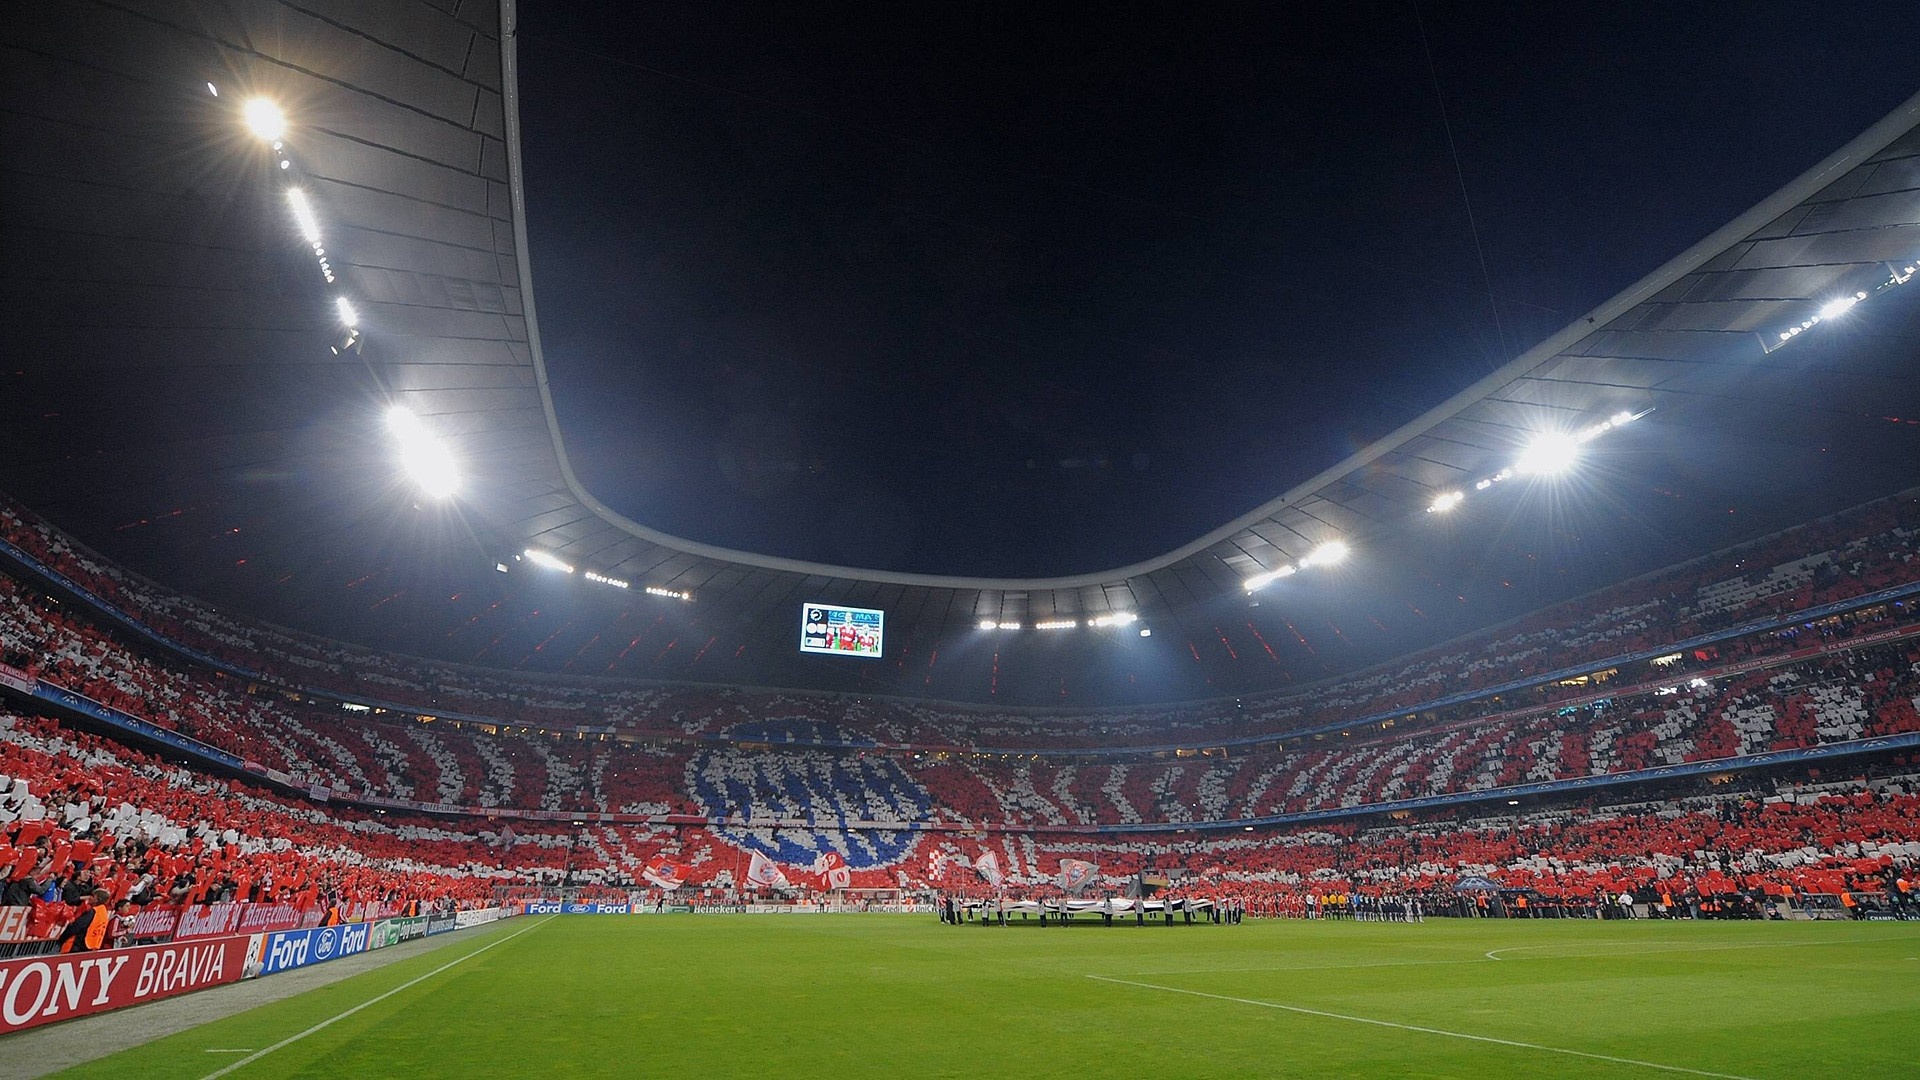 Bayern Munchen FC: Since the beginning of the 2005–06 season, it has played its home games at the Allianz Arena. 1920x1080 Full HD Wallpaper.